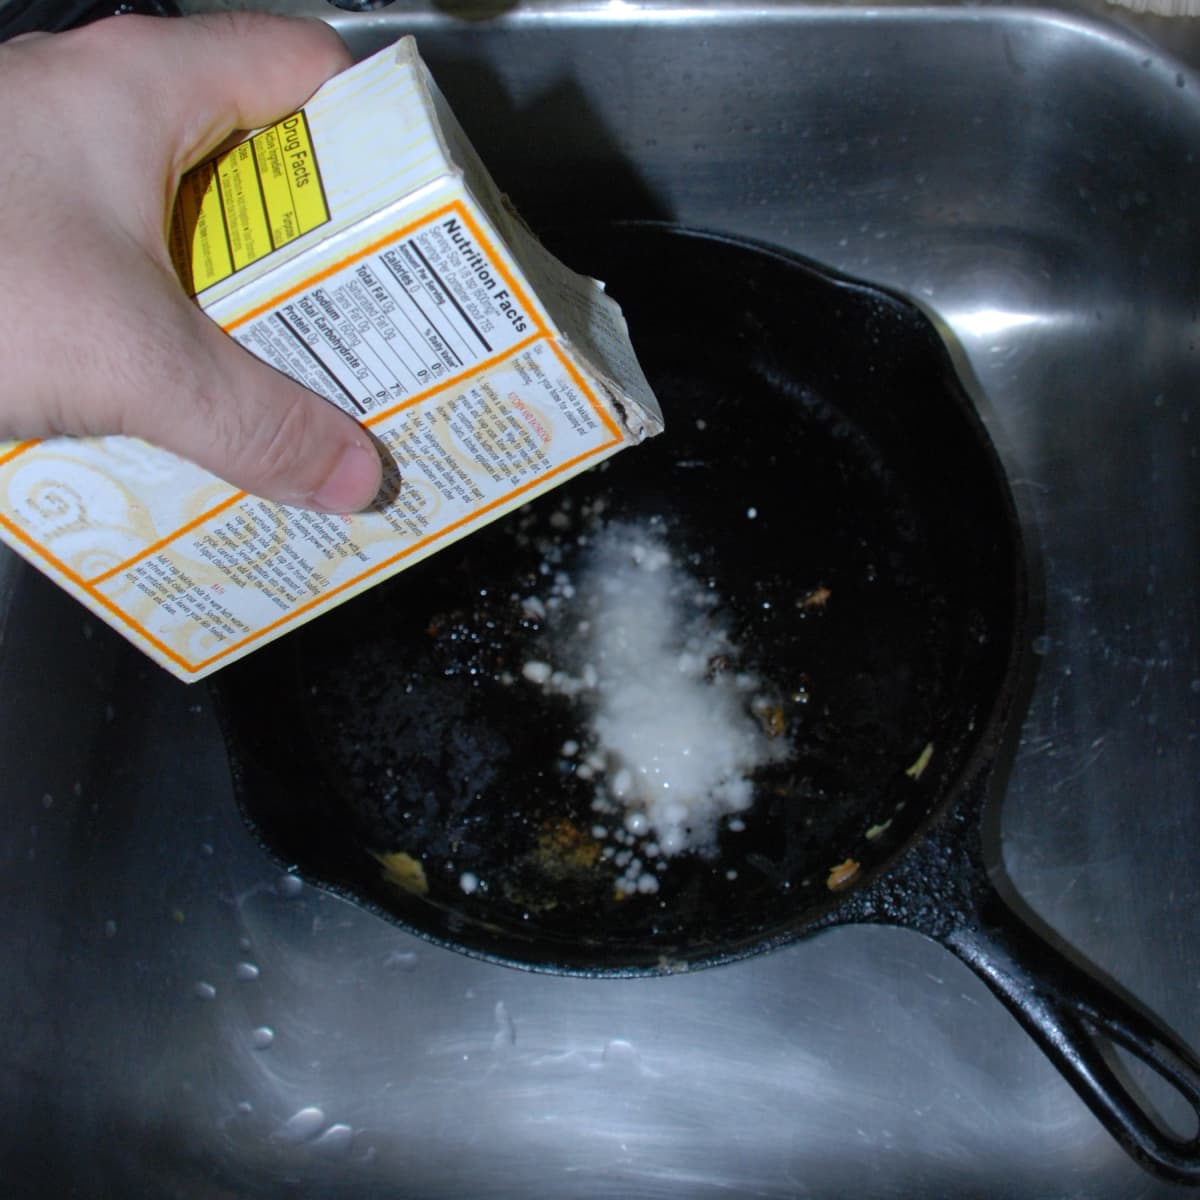 The Best Way To Clean and Season a Cast Iron Skillet